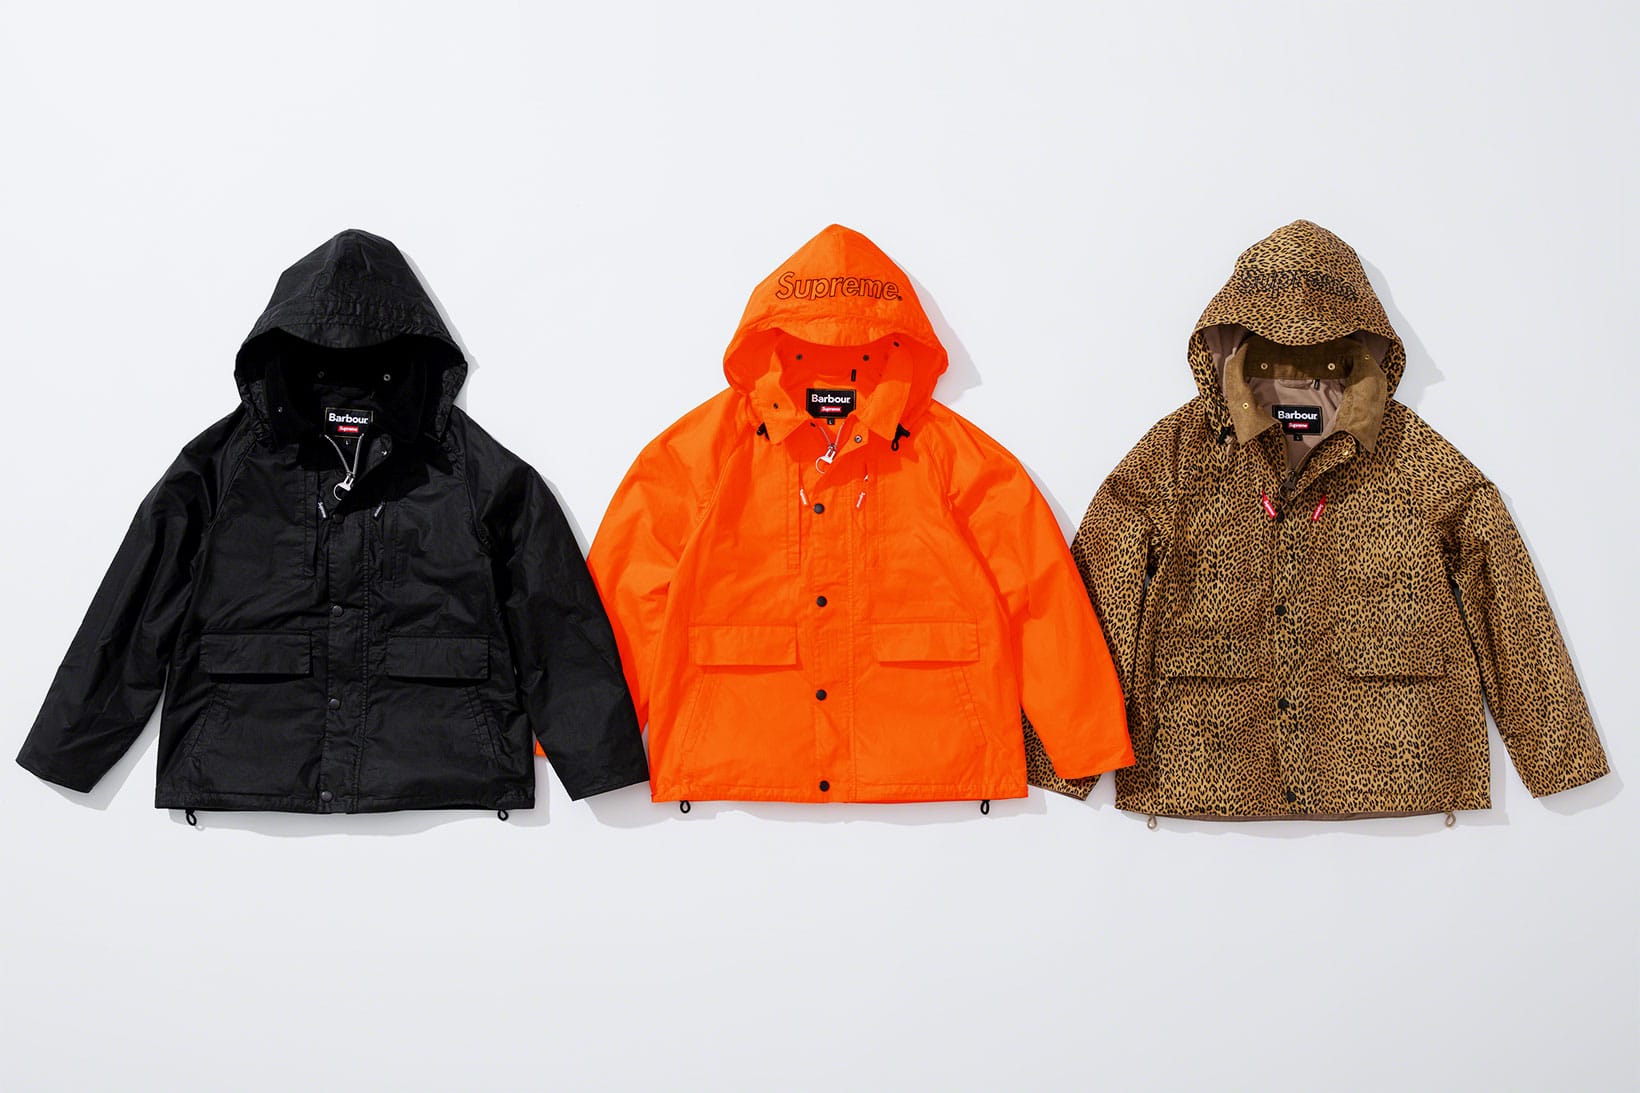 Barbour x Supreme Collaboration to 